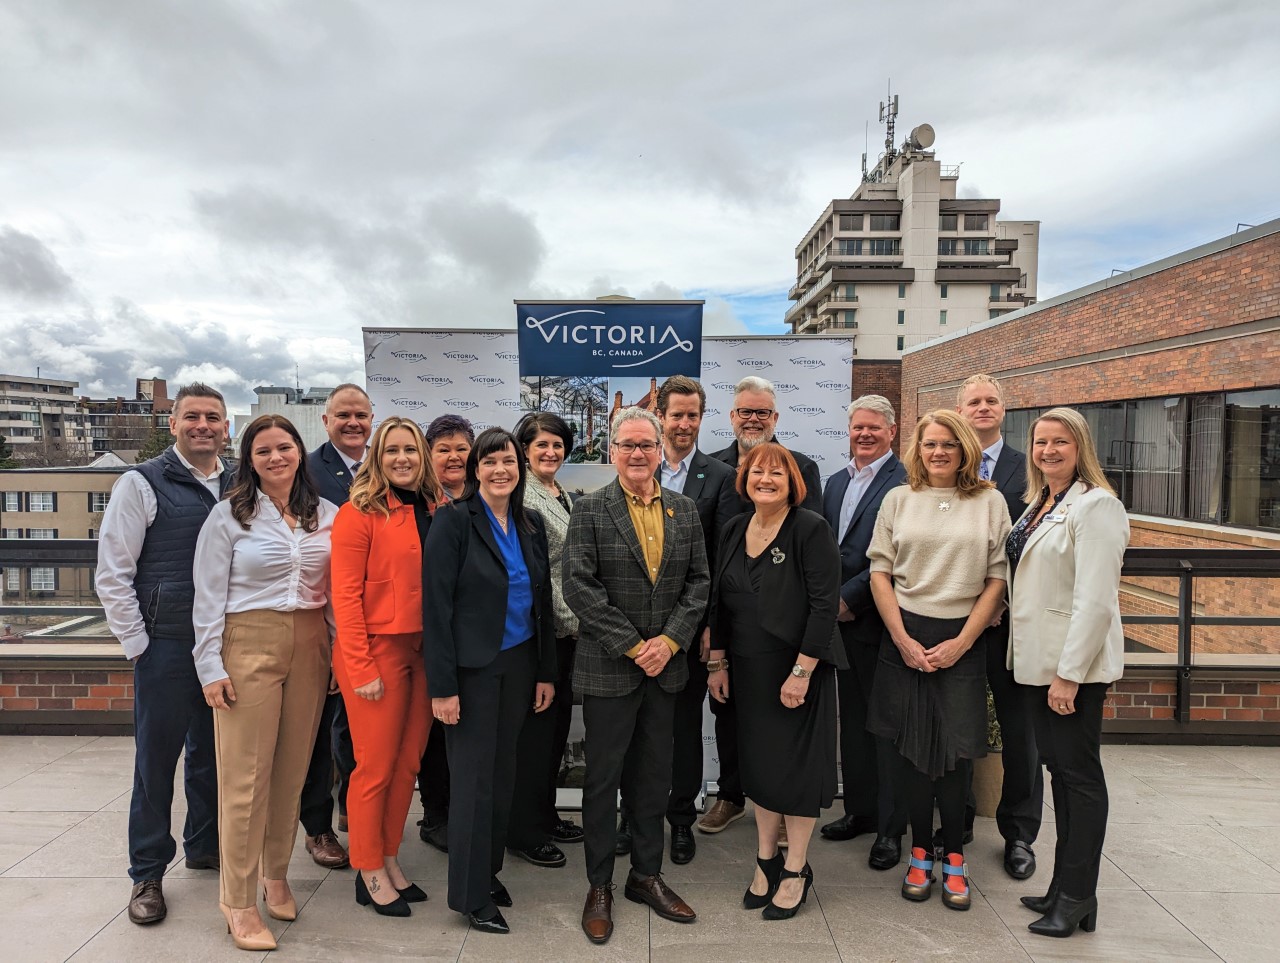 WestJet Executive visit to Victoria brings renewed commitment and focus on region  